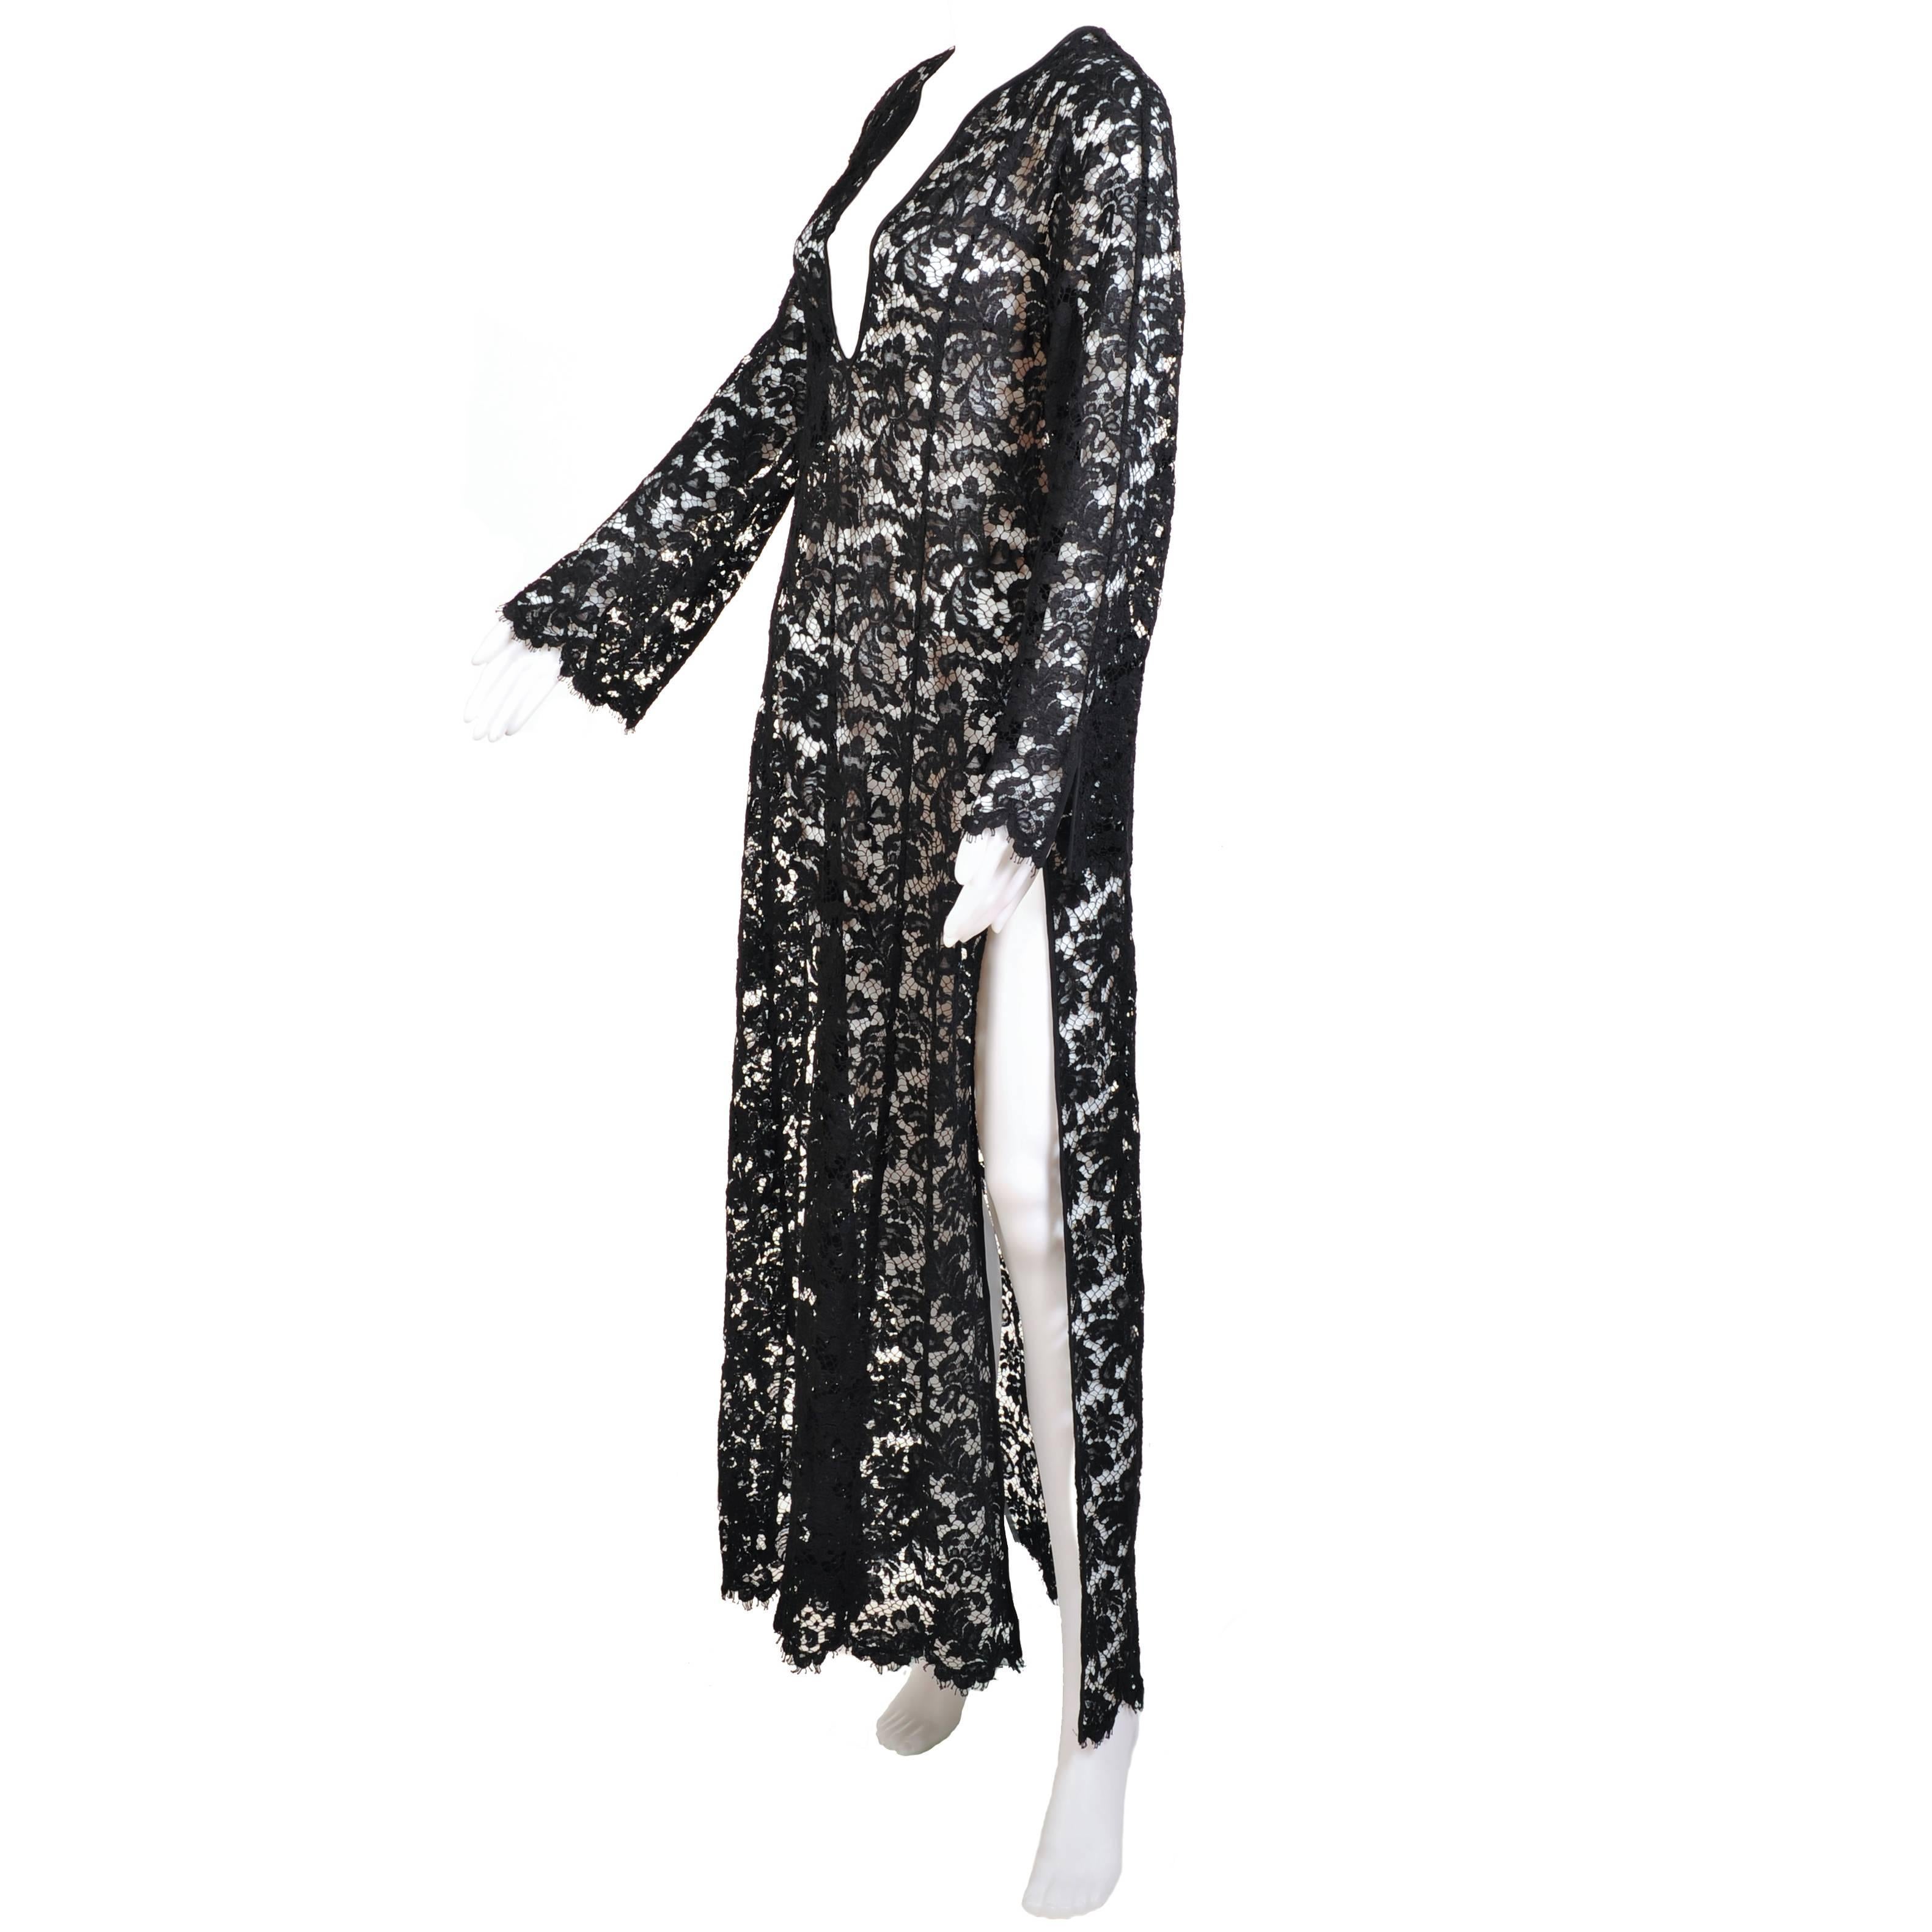 1995 Vintage Iconic Tom Ford for Gucci Black Lace Dress